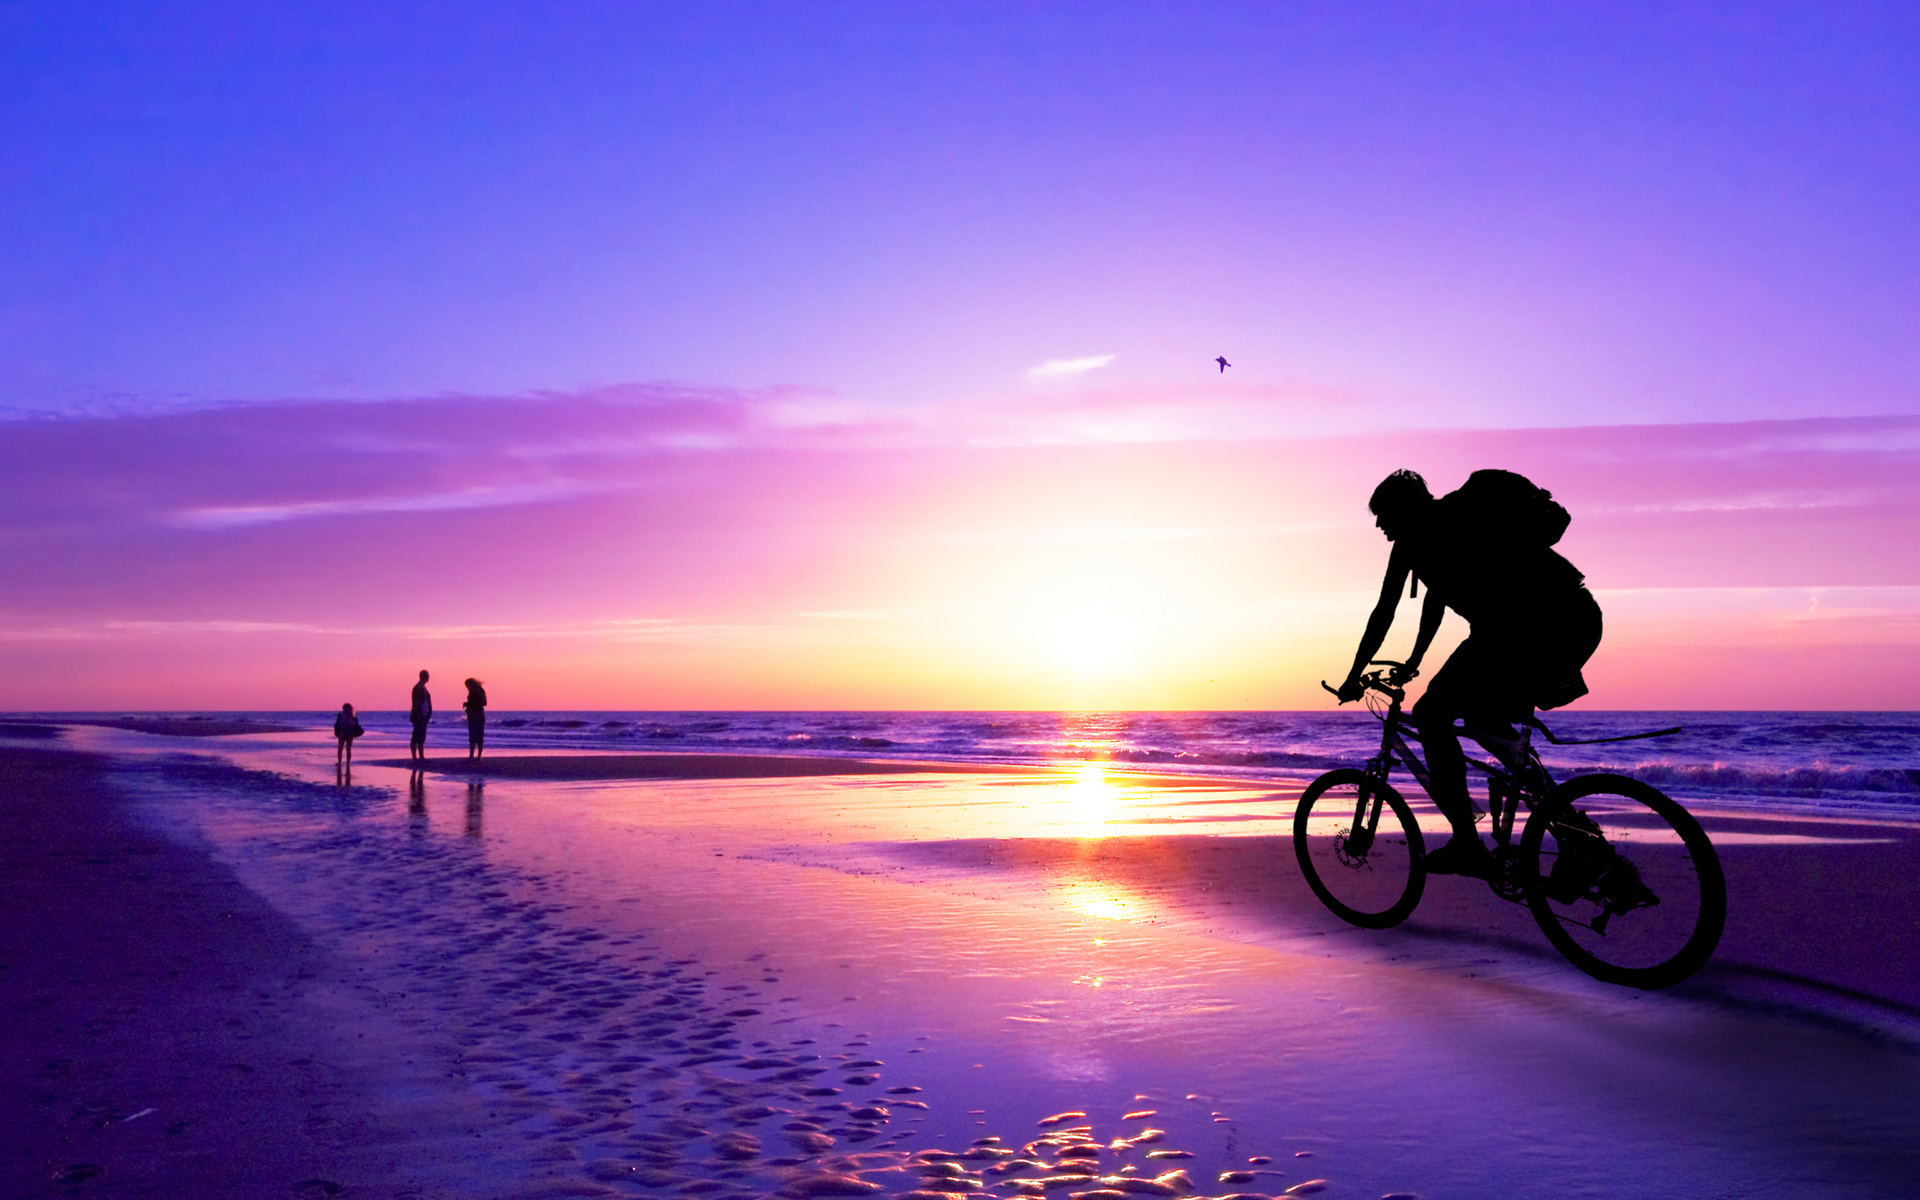 vehicles, Bicycles, Bikes, Sports, People, Nature, Ocean, Sea, Seascape, Waves, Beaches, Path, Trail, Sidewalk, Boardwalk, Sky, Clouds, Sunset, Sunrise, Color Wallpaper